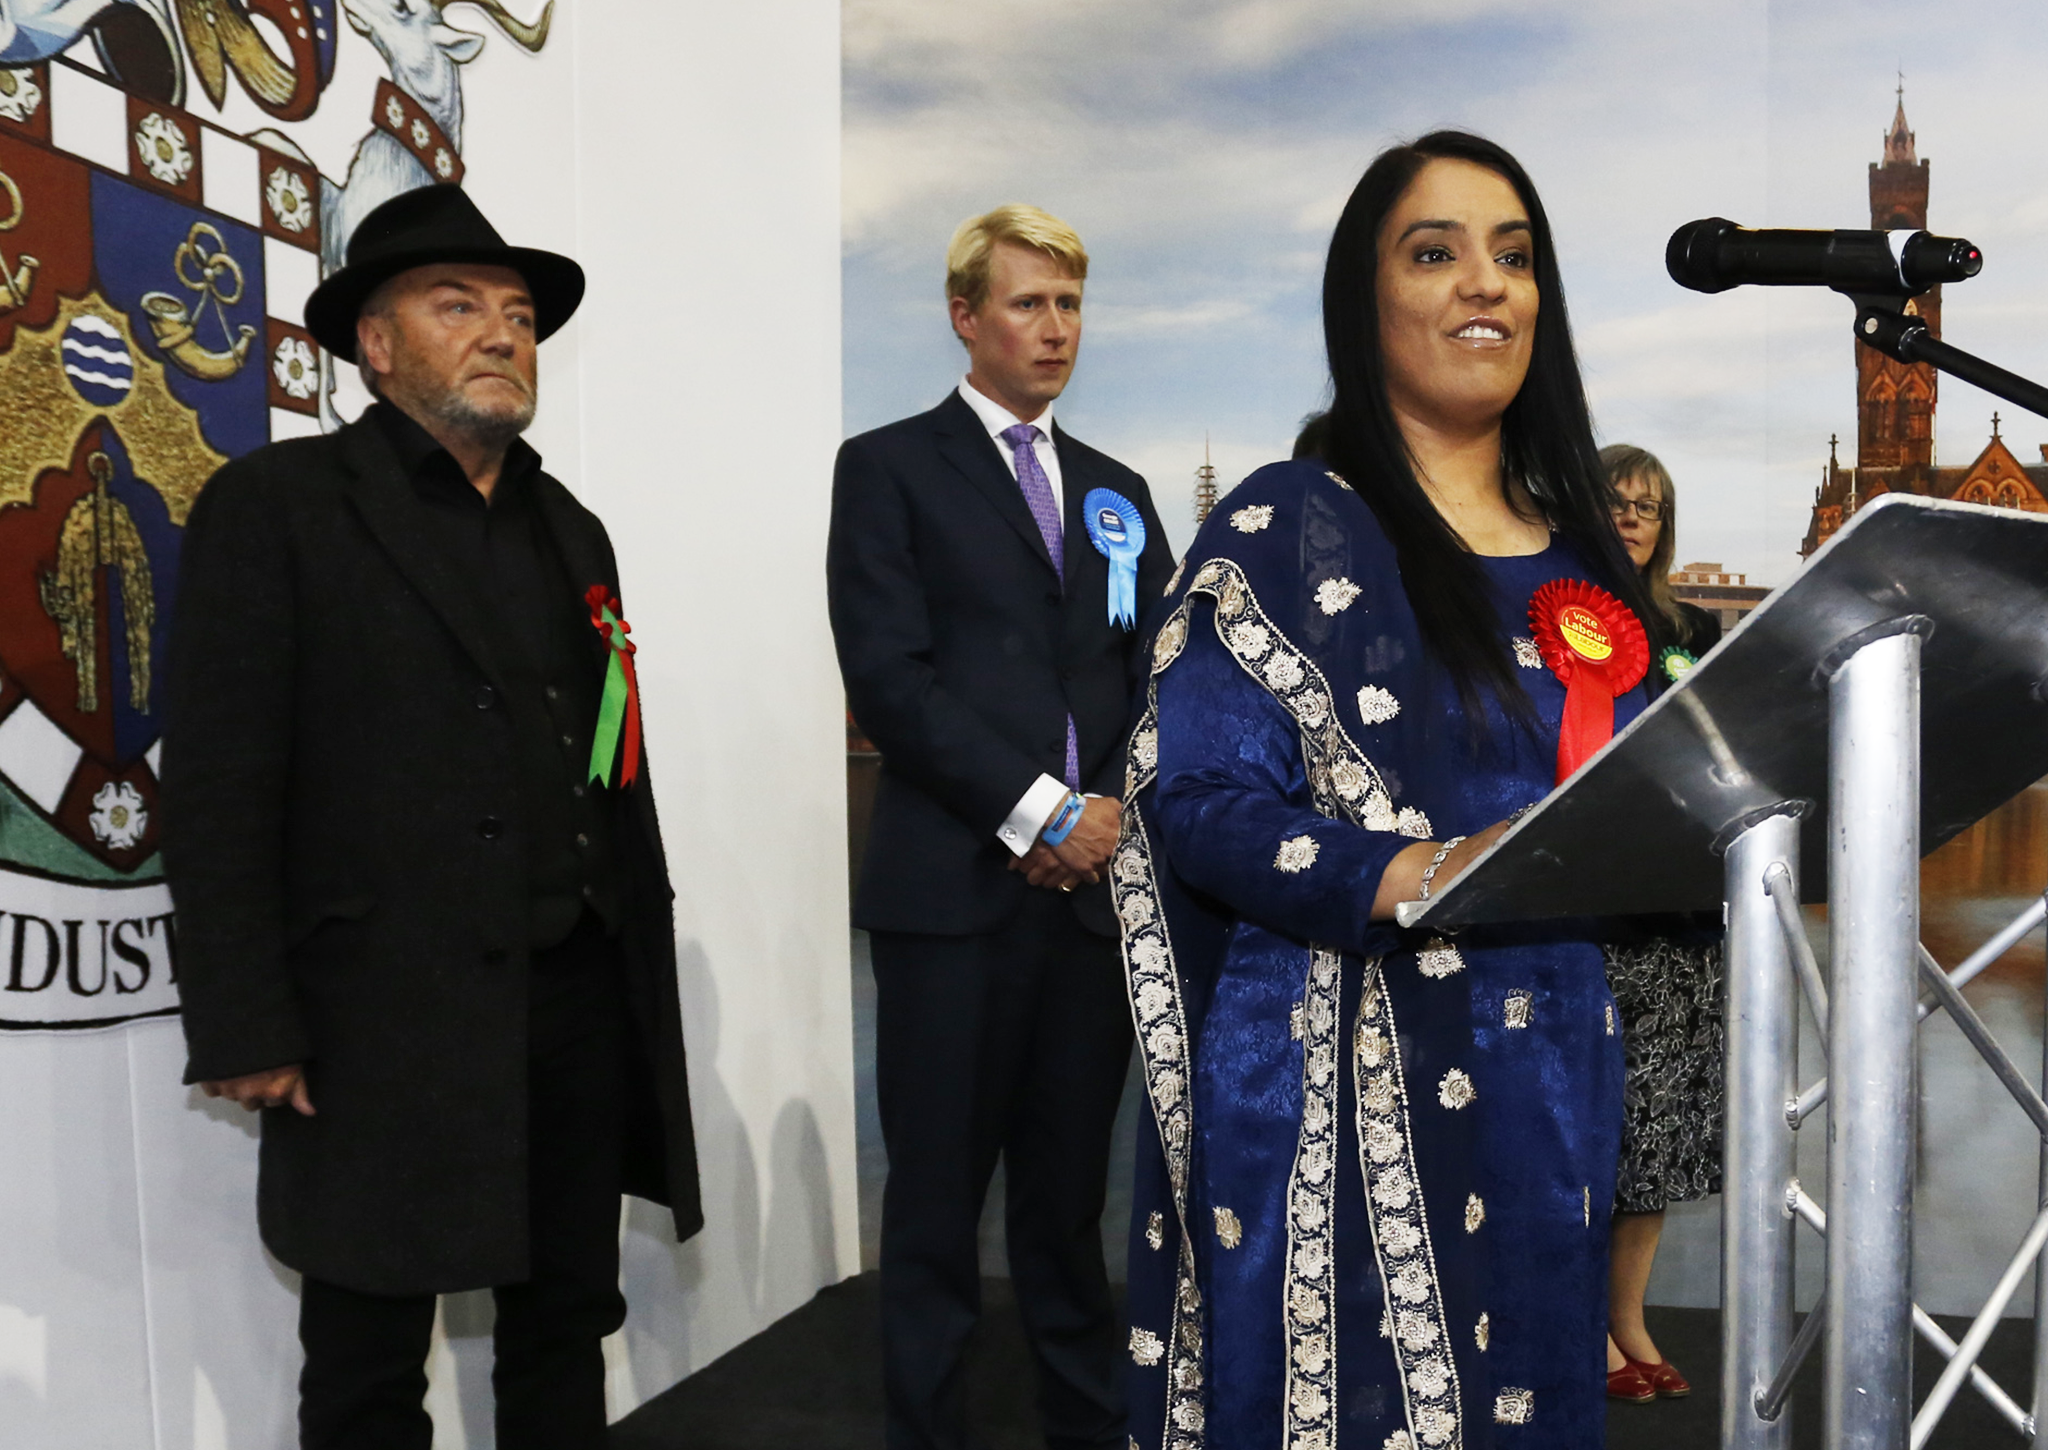 Labour candidate Naz Shah makes her victory speech after defeating George Galloway